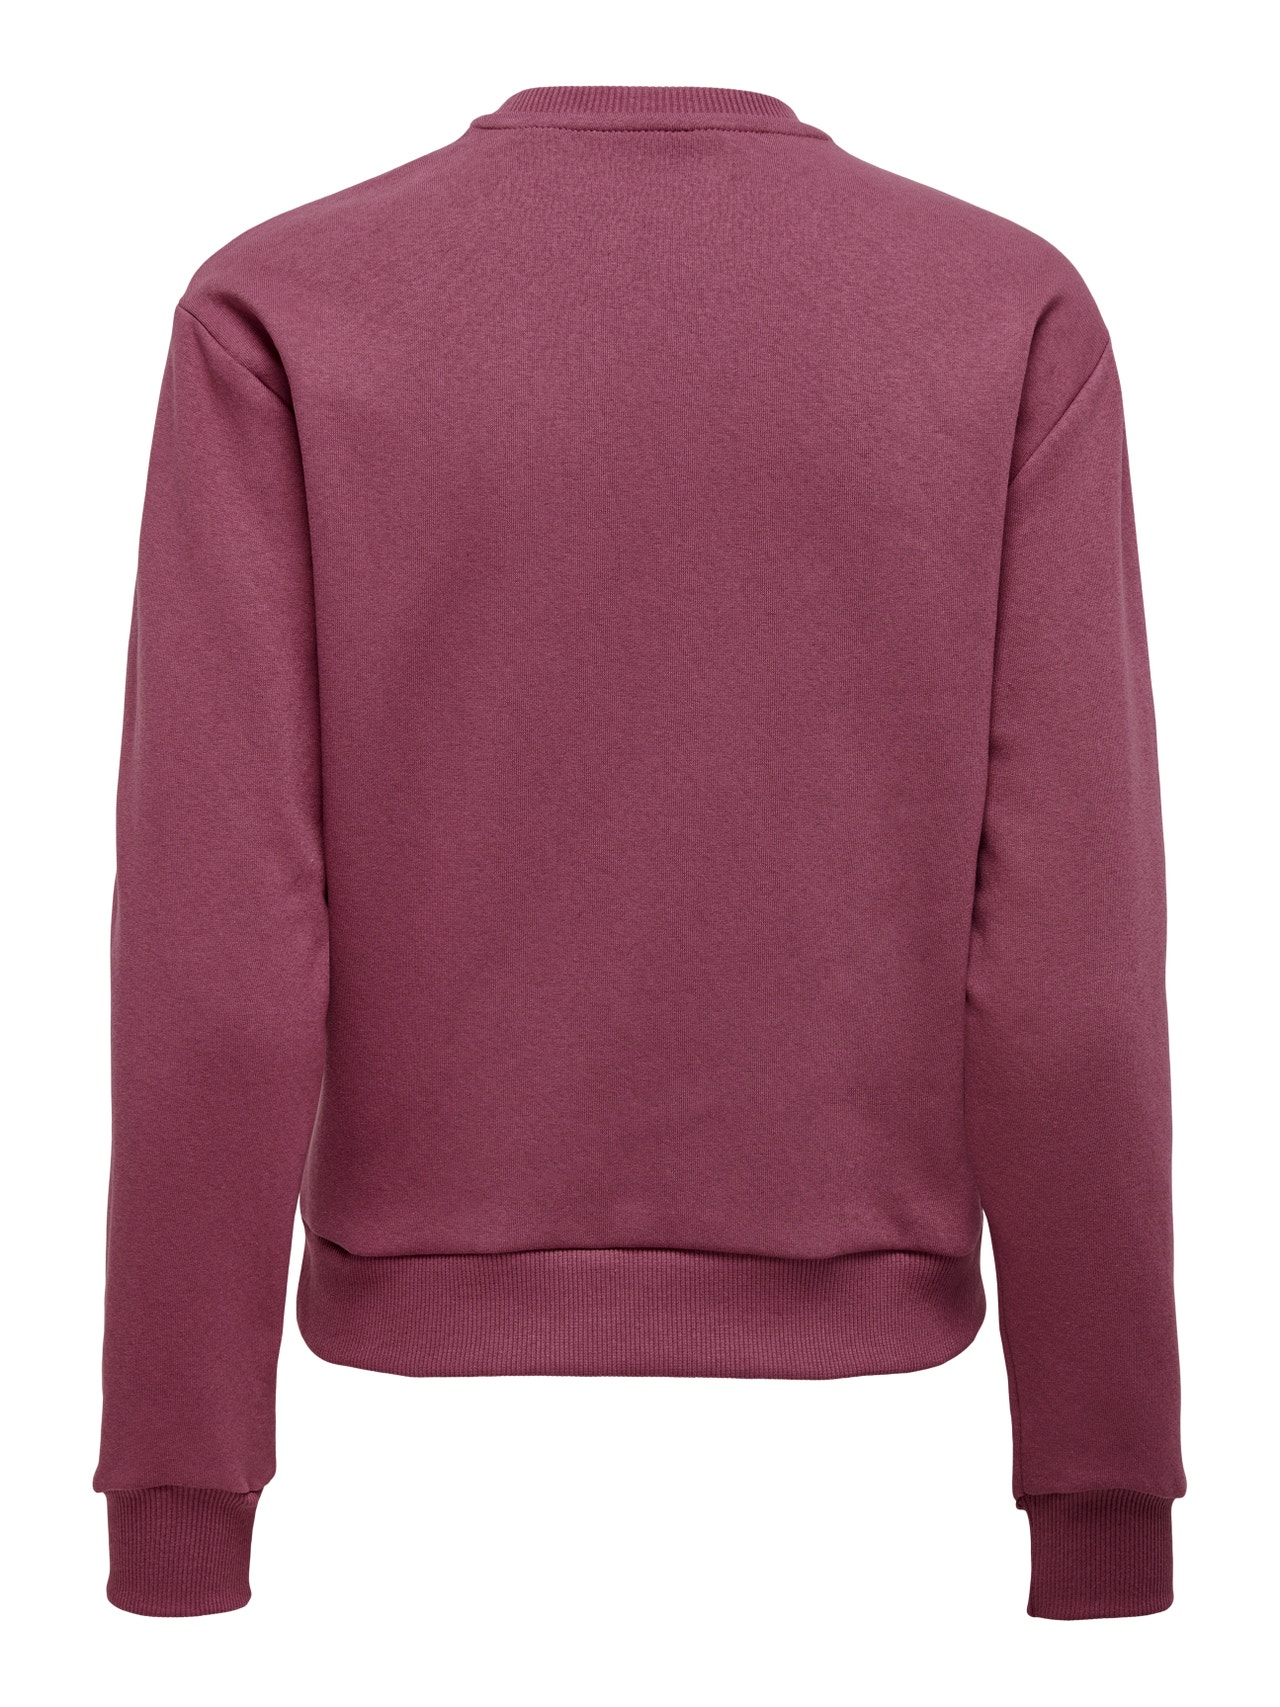 ONLY Regular Fit O-Neck Sweatshirt -Crushed Berry - 15289279